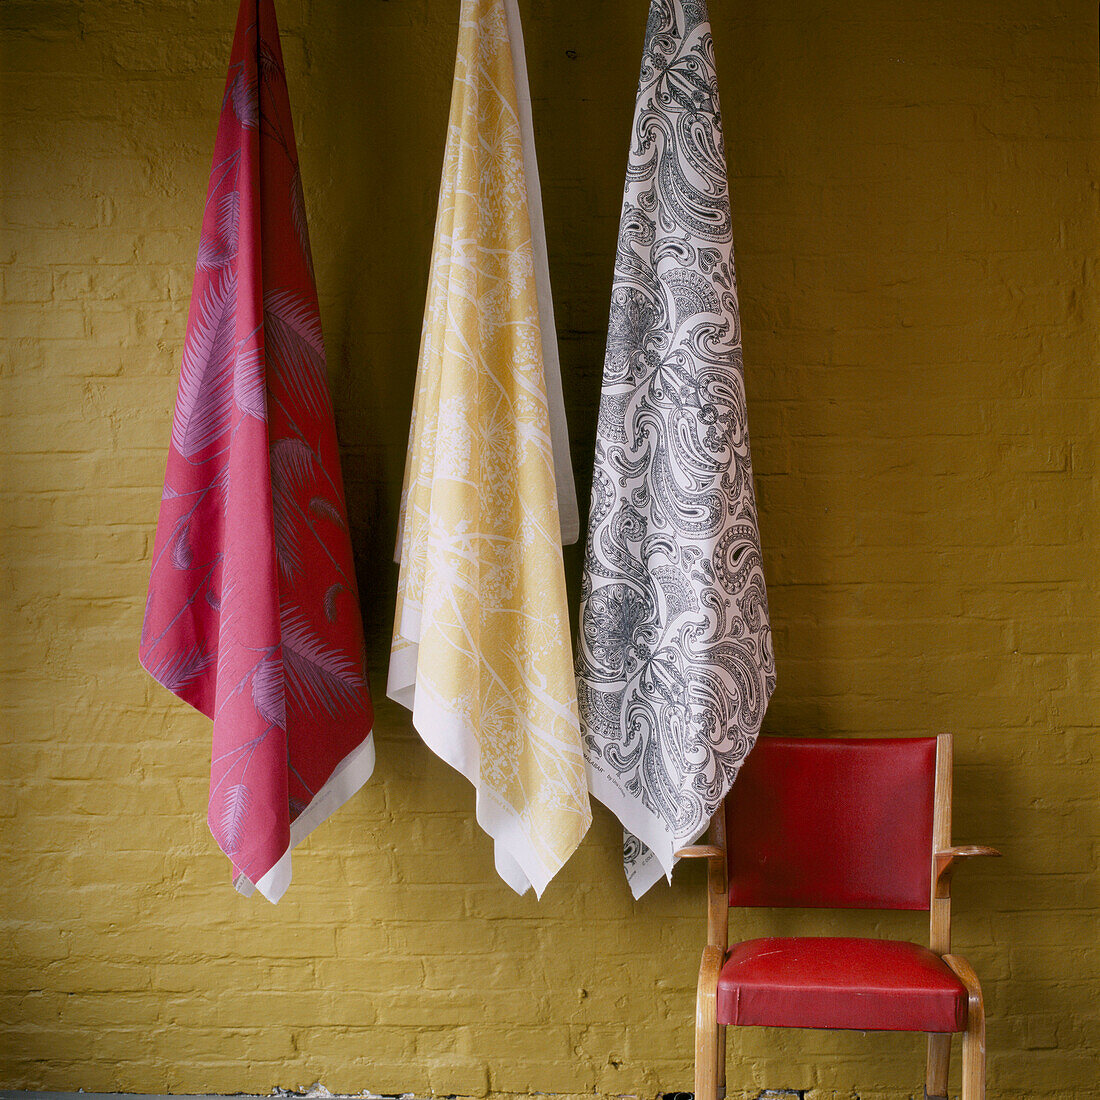 Fabric hanging on hooks against a painted brick wall and armchair 